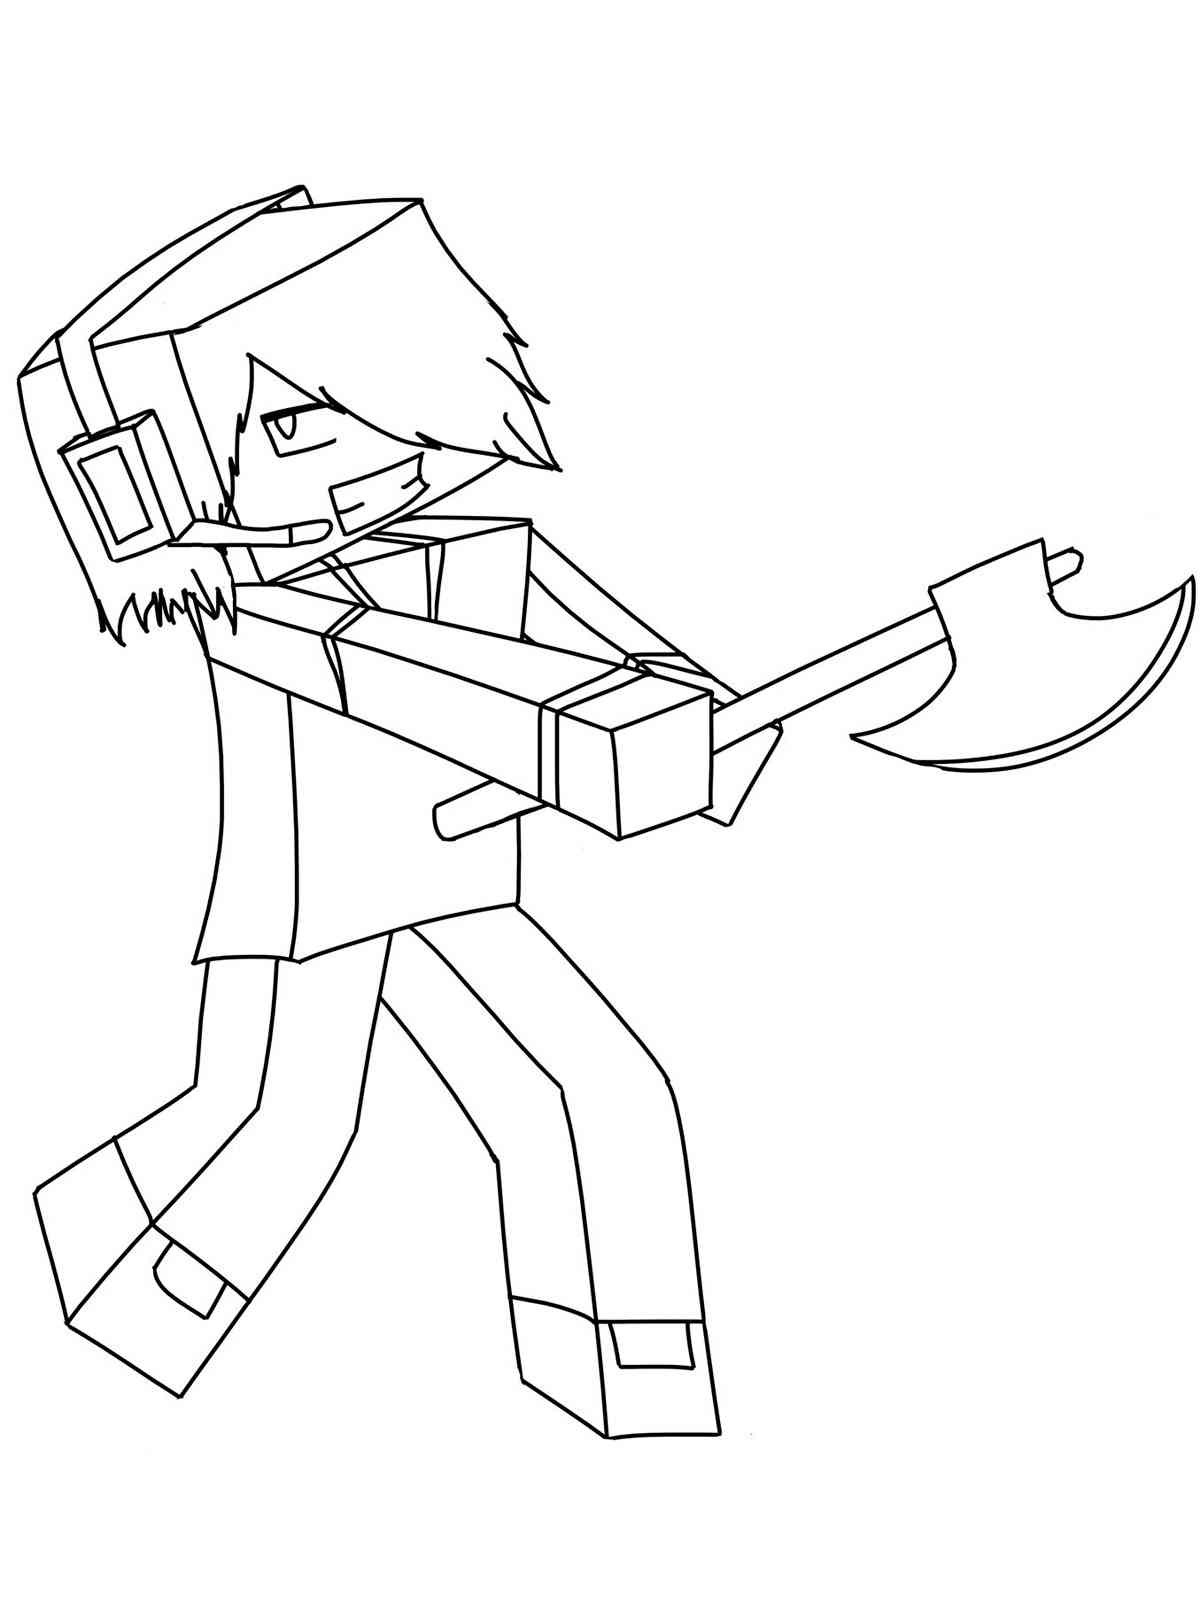 Axeman Roblox coloring page